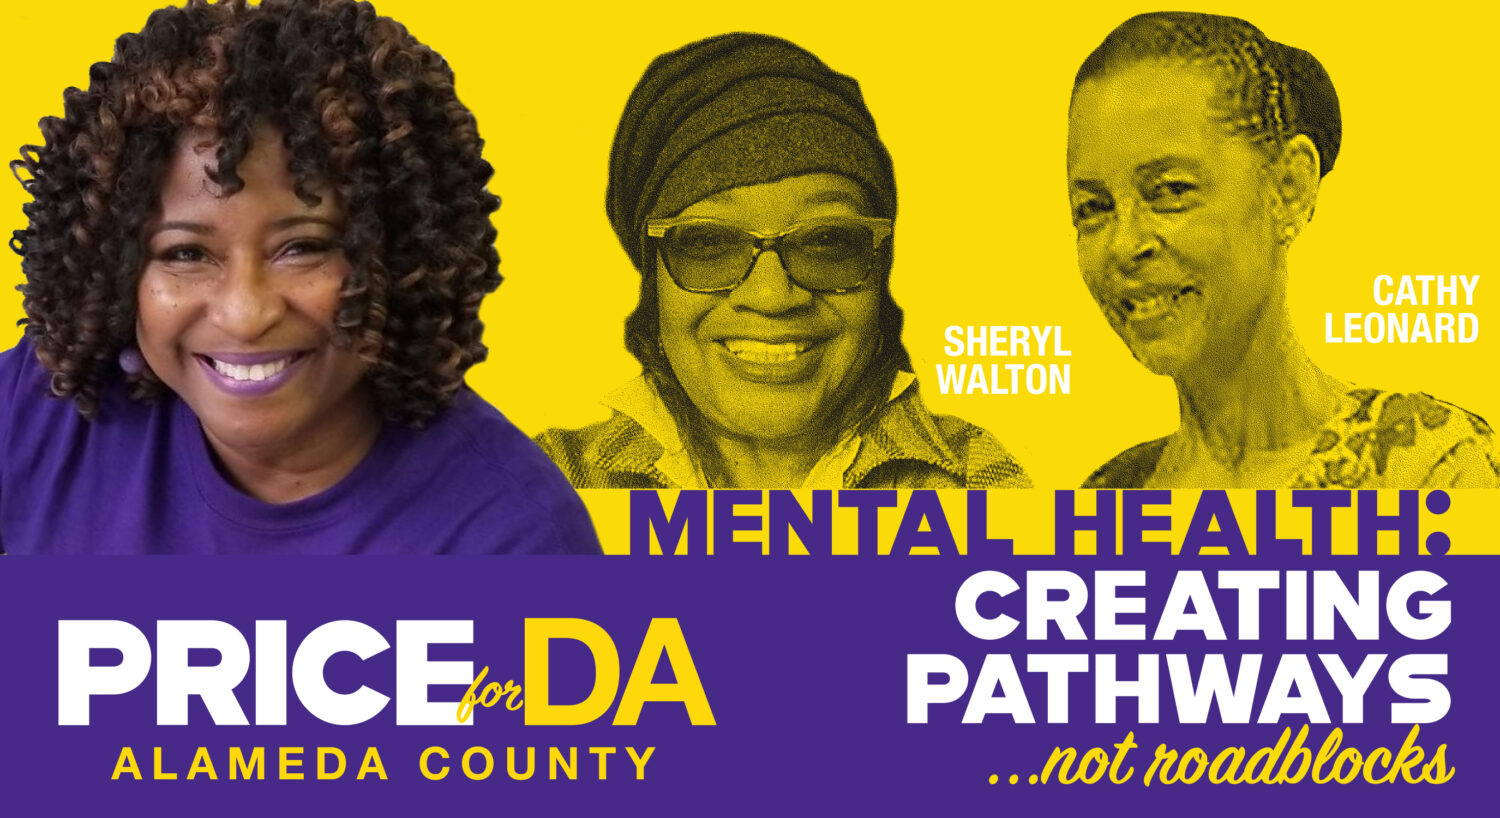 Pamela Price for Alameda County District Attorney is endorsed by Oakland-based Community Advocates Sheryl Walton and Cathy Leonard to create pathways to justice, not roadblocks